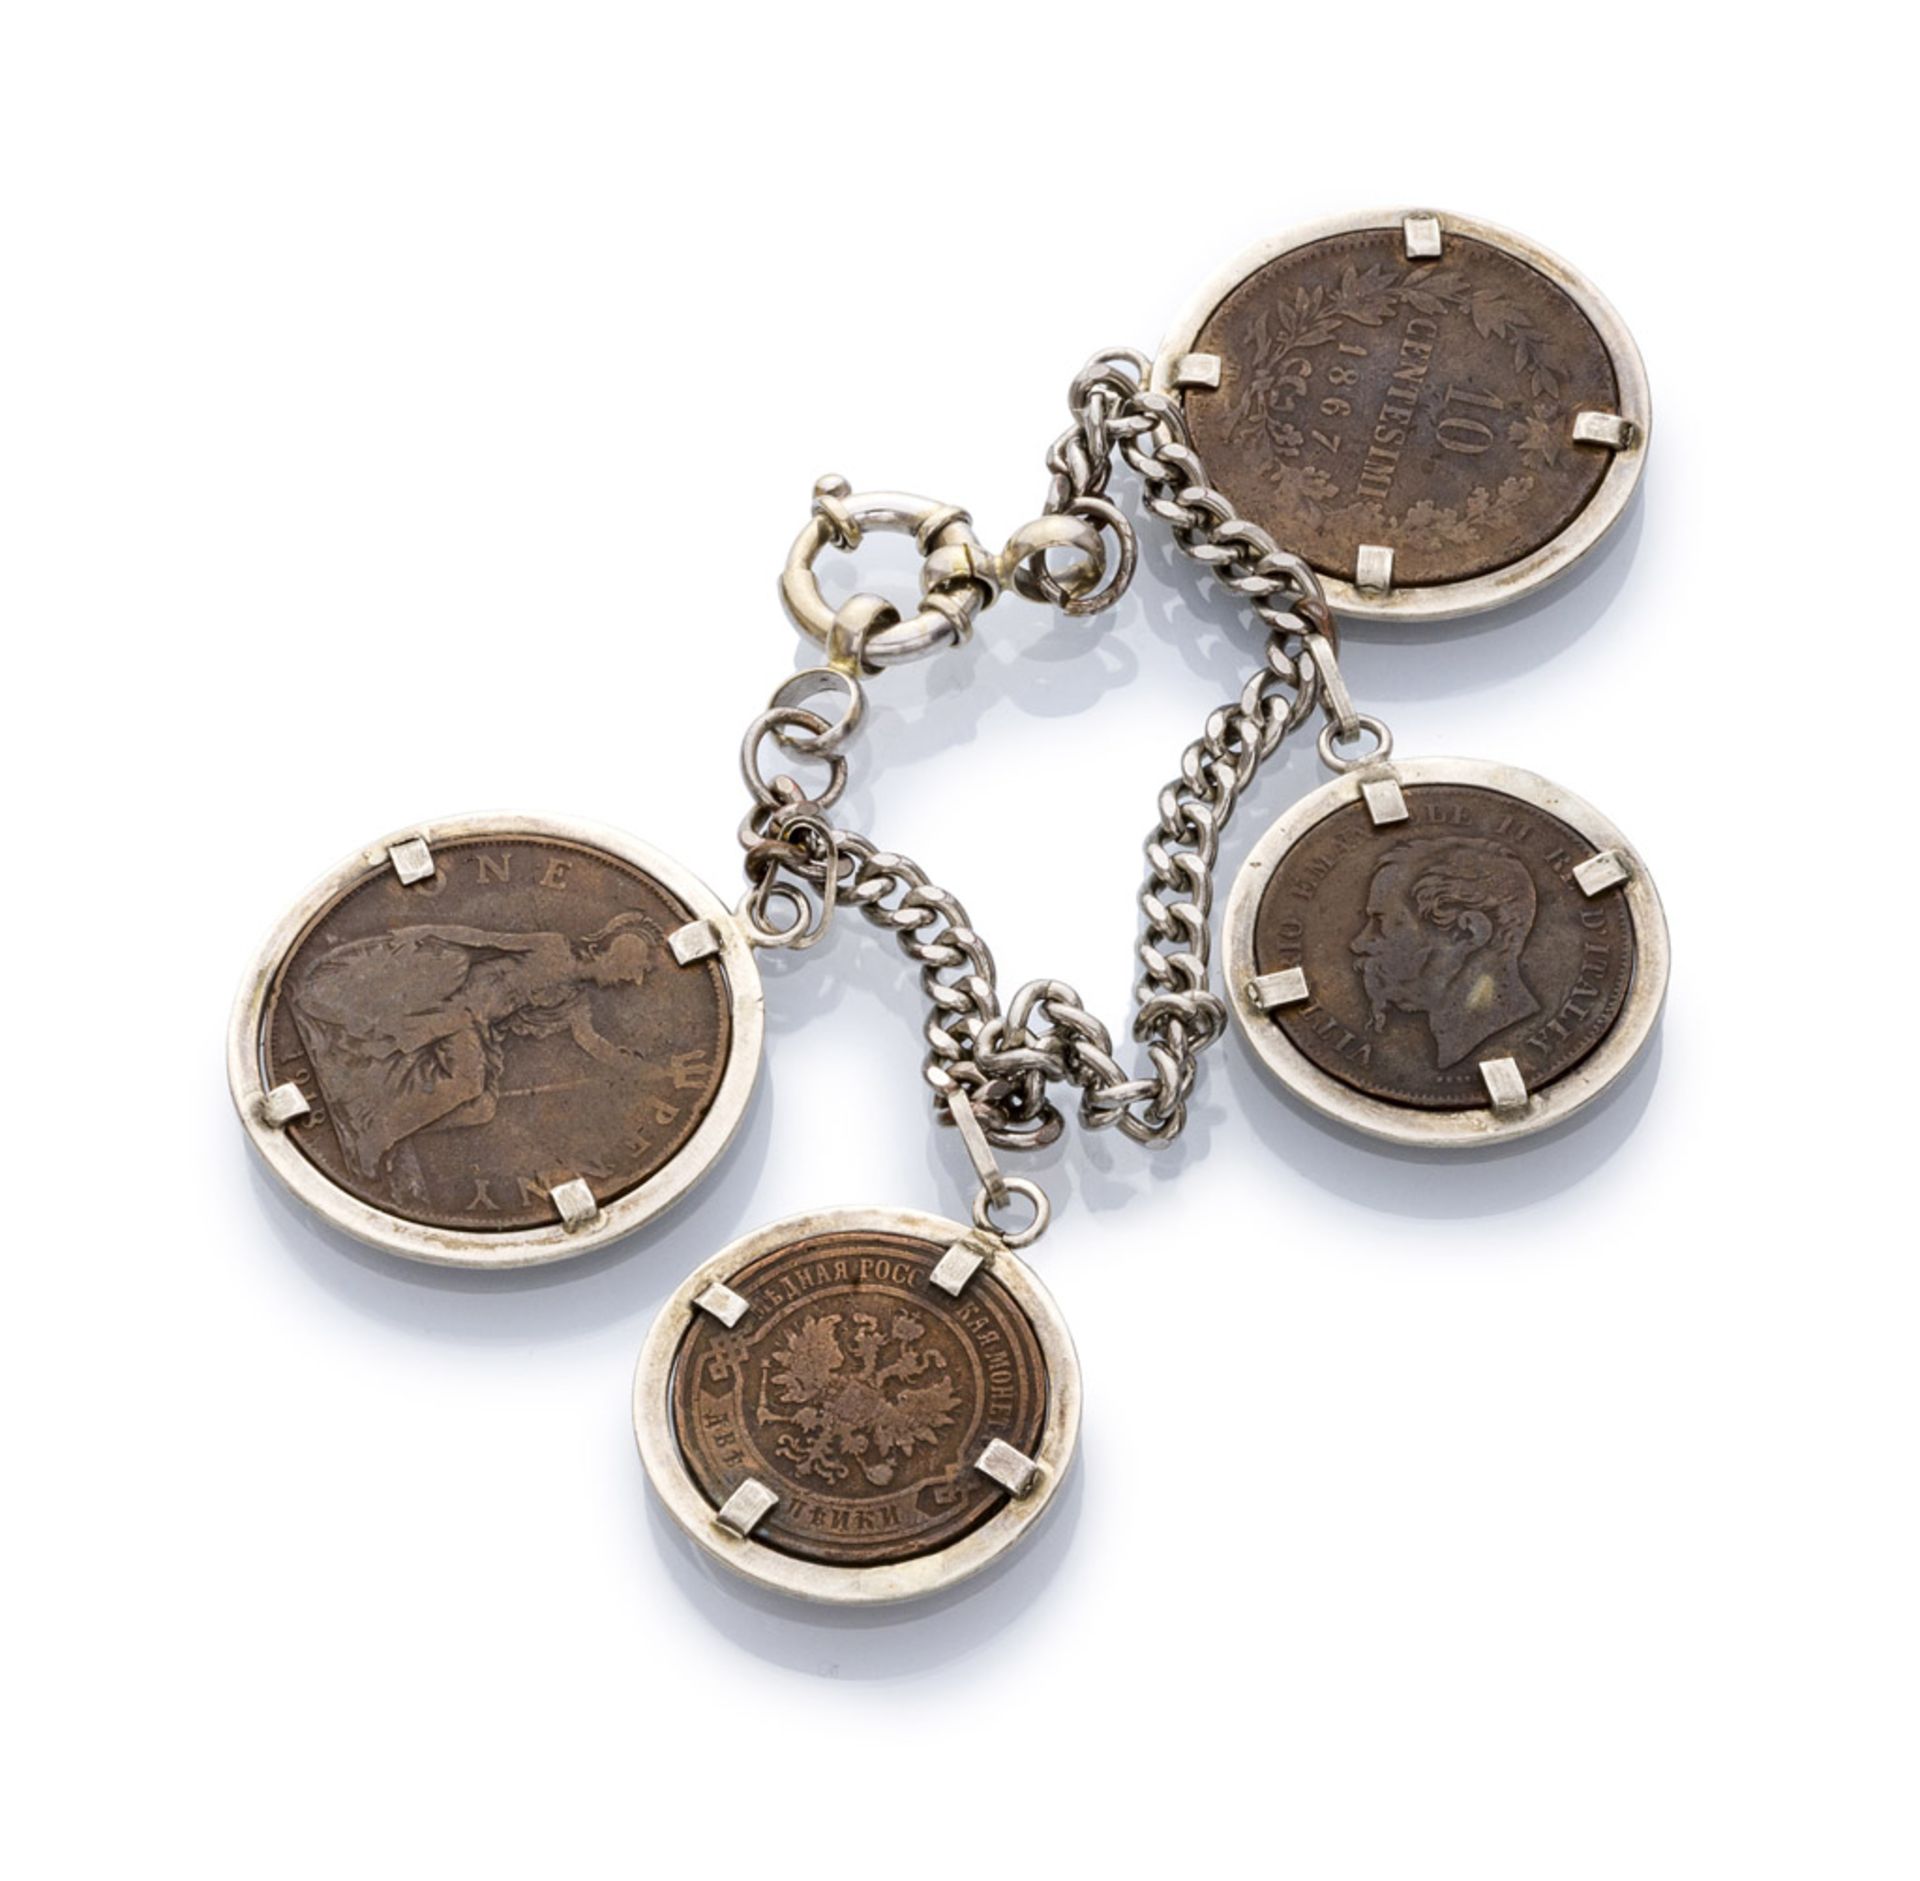 ATTRACTIVE BRACELET chain-shaped in gilded metal with pending antique coins. Length cm. 19. GRAZIOSO